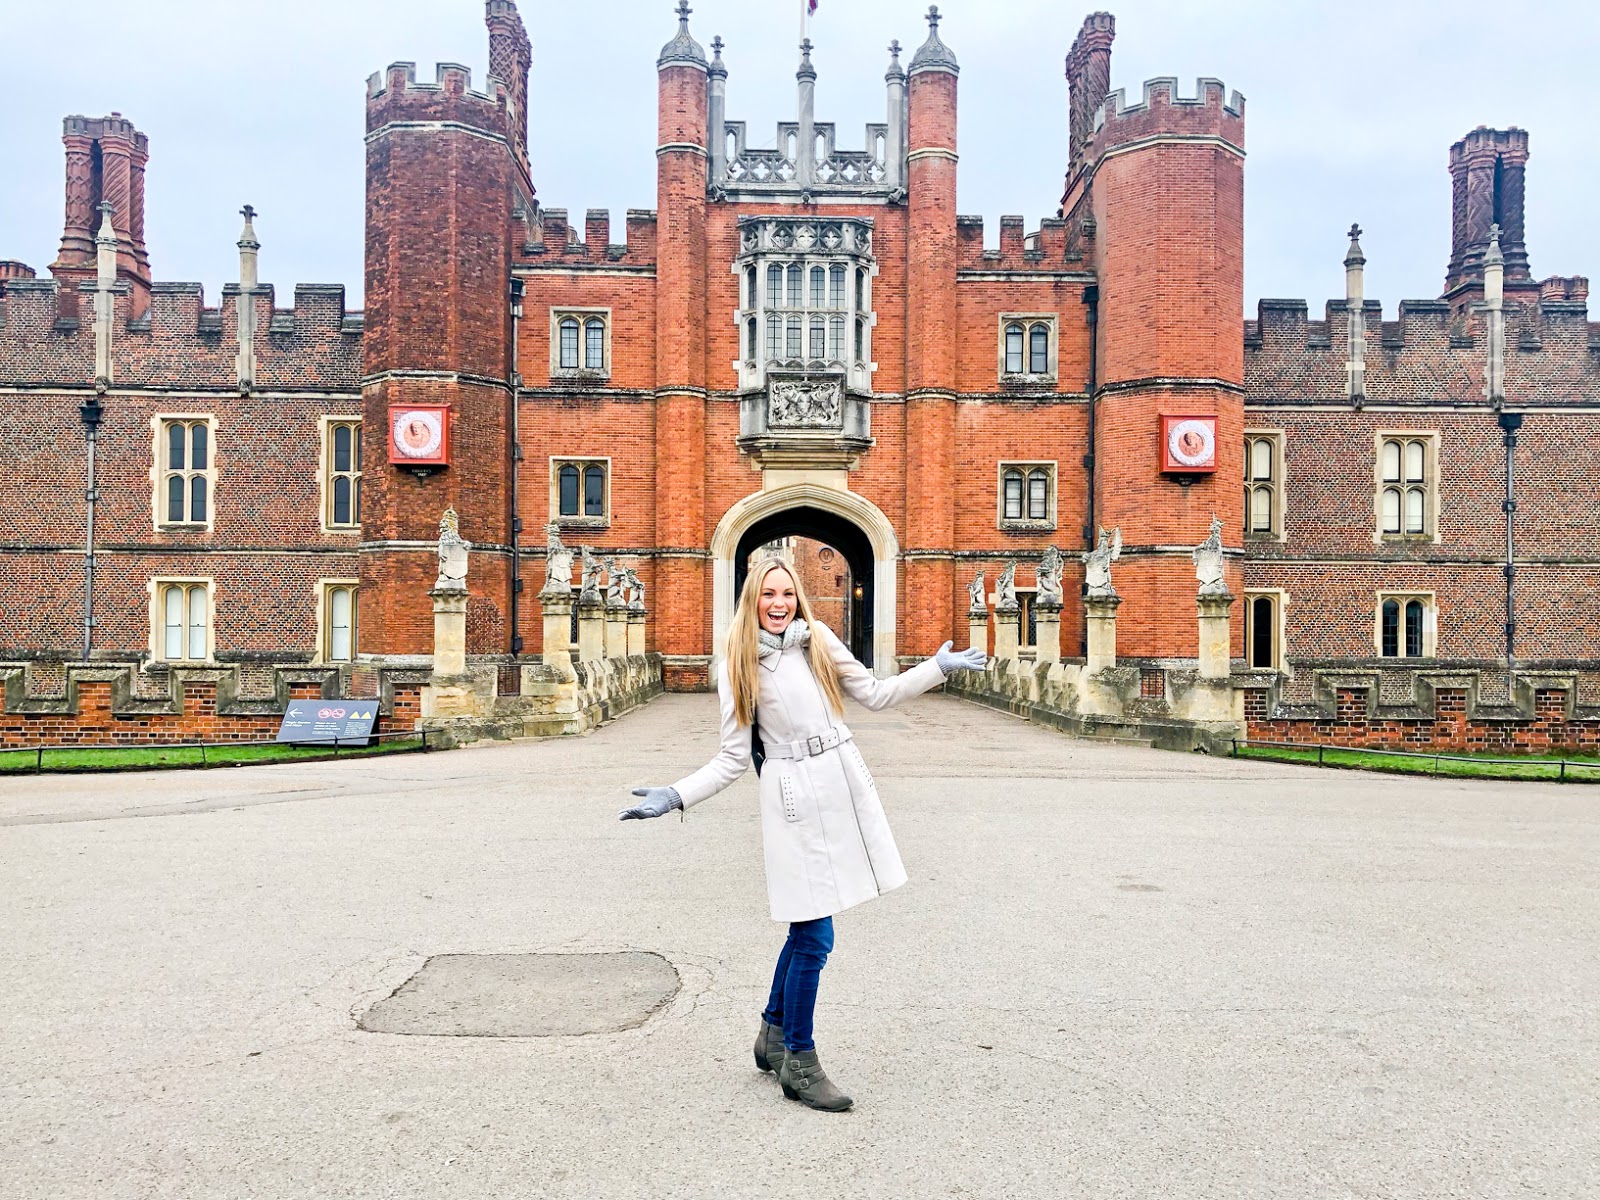 10 things not to miss at hampton court palace,  hampton court palace tudor must see,  hampton court palace